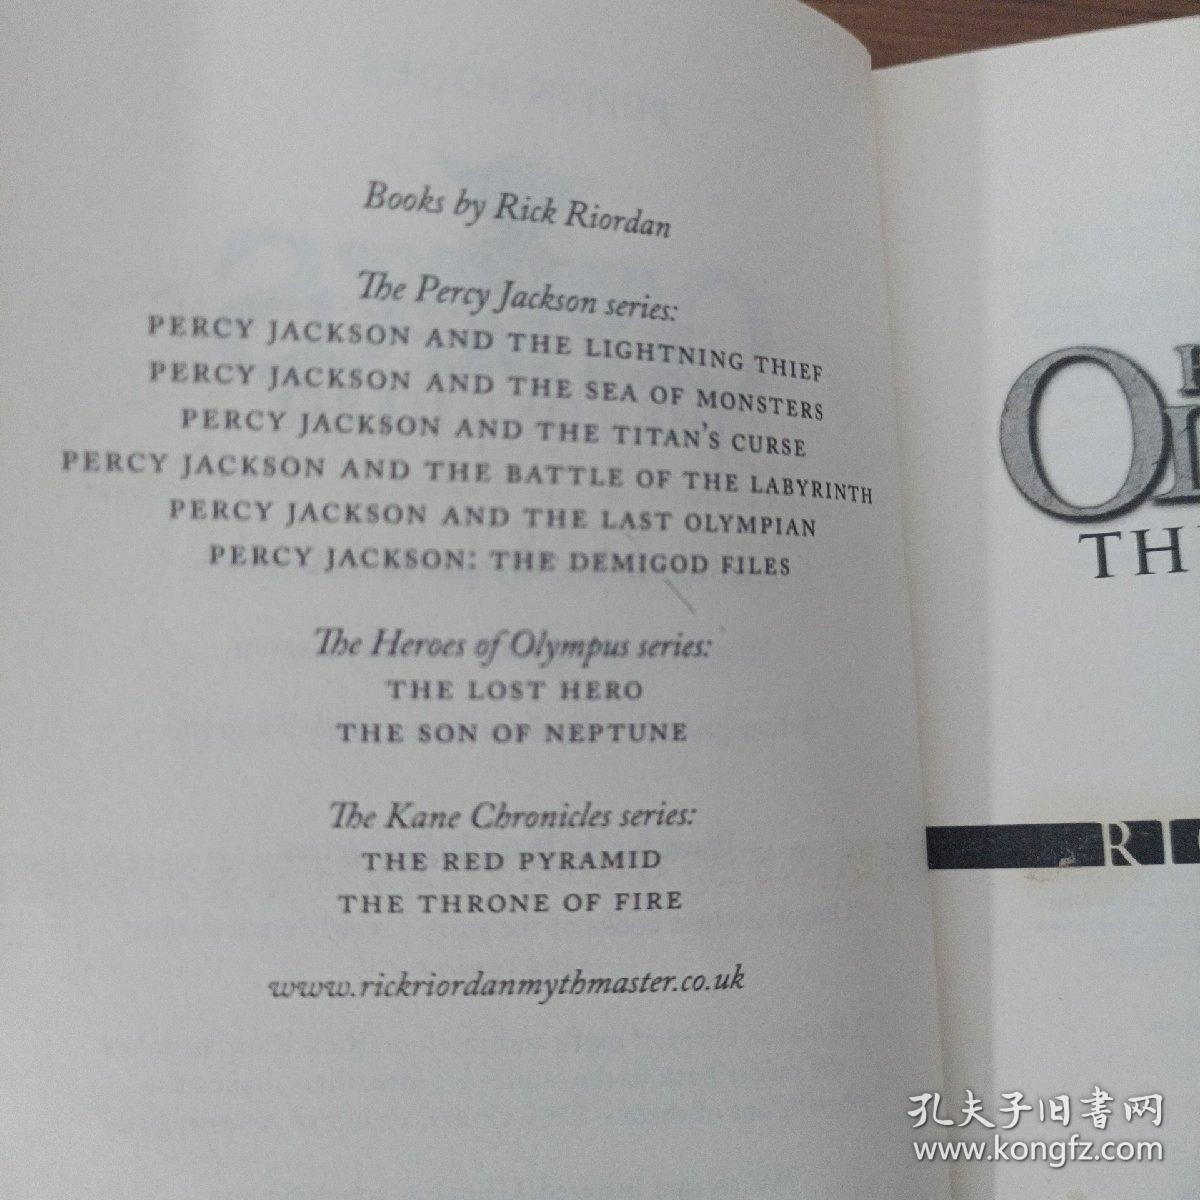 The Heroes of Olympus, Book One The Lost Hero 波西 杰克逊奥林匹斯英雄系列1：失落的英雄